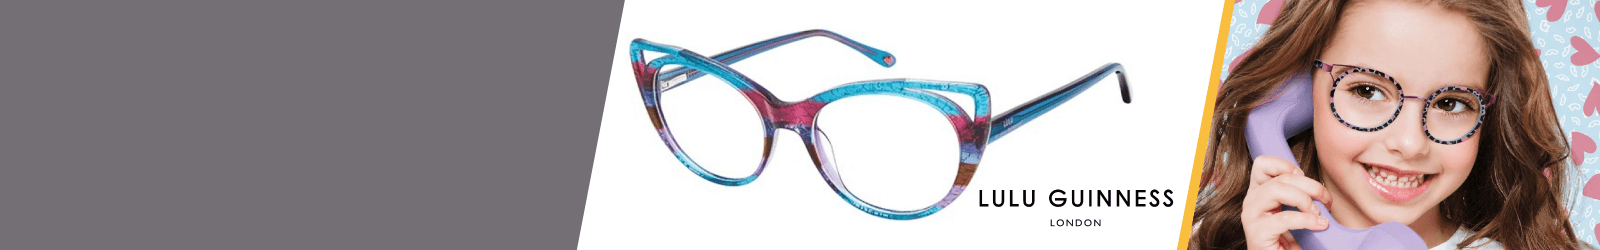 Lulu Guinness Kids Glasses from 2 to 4-year-old